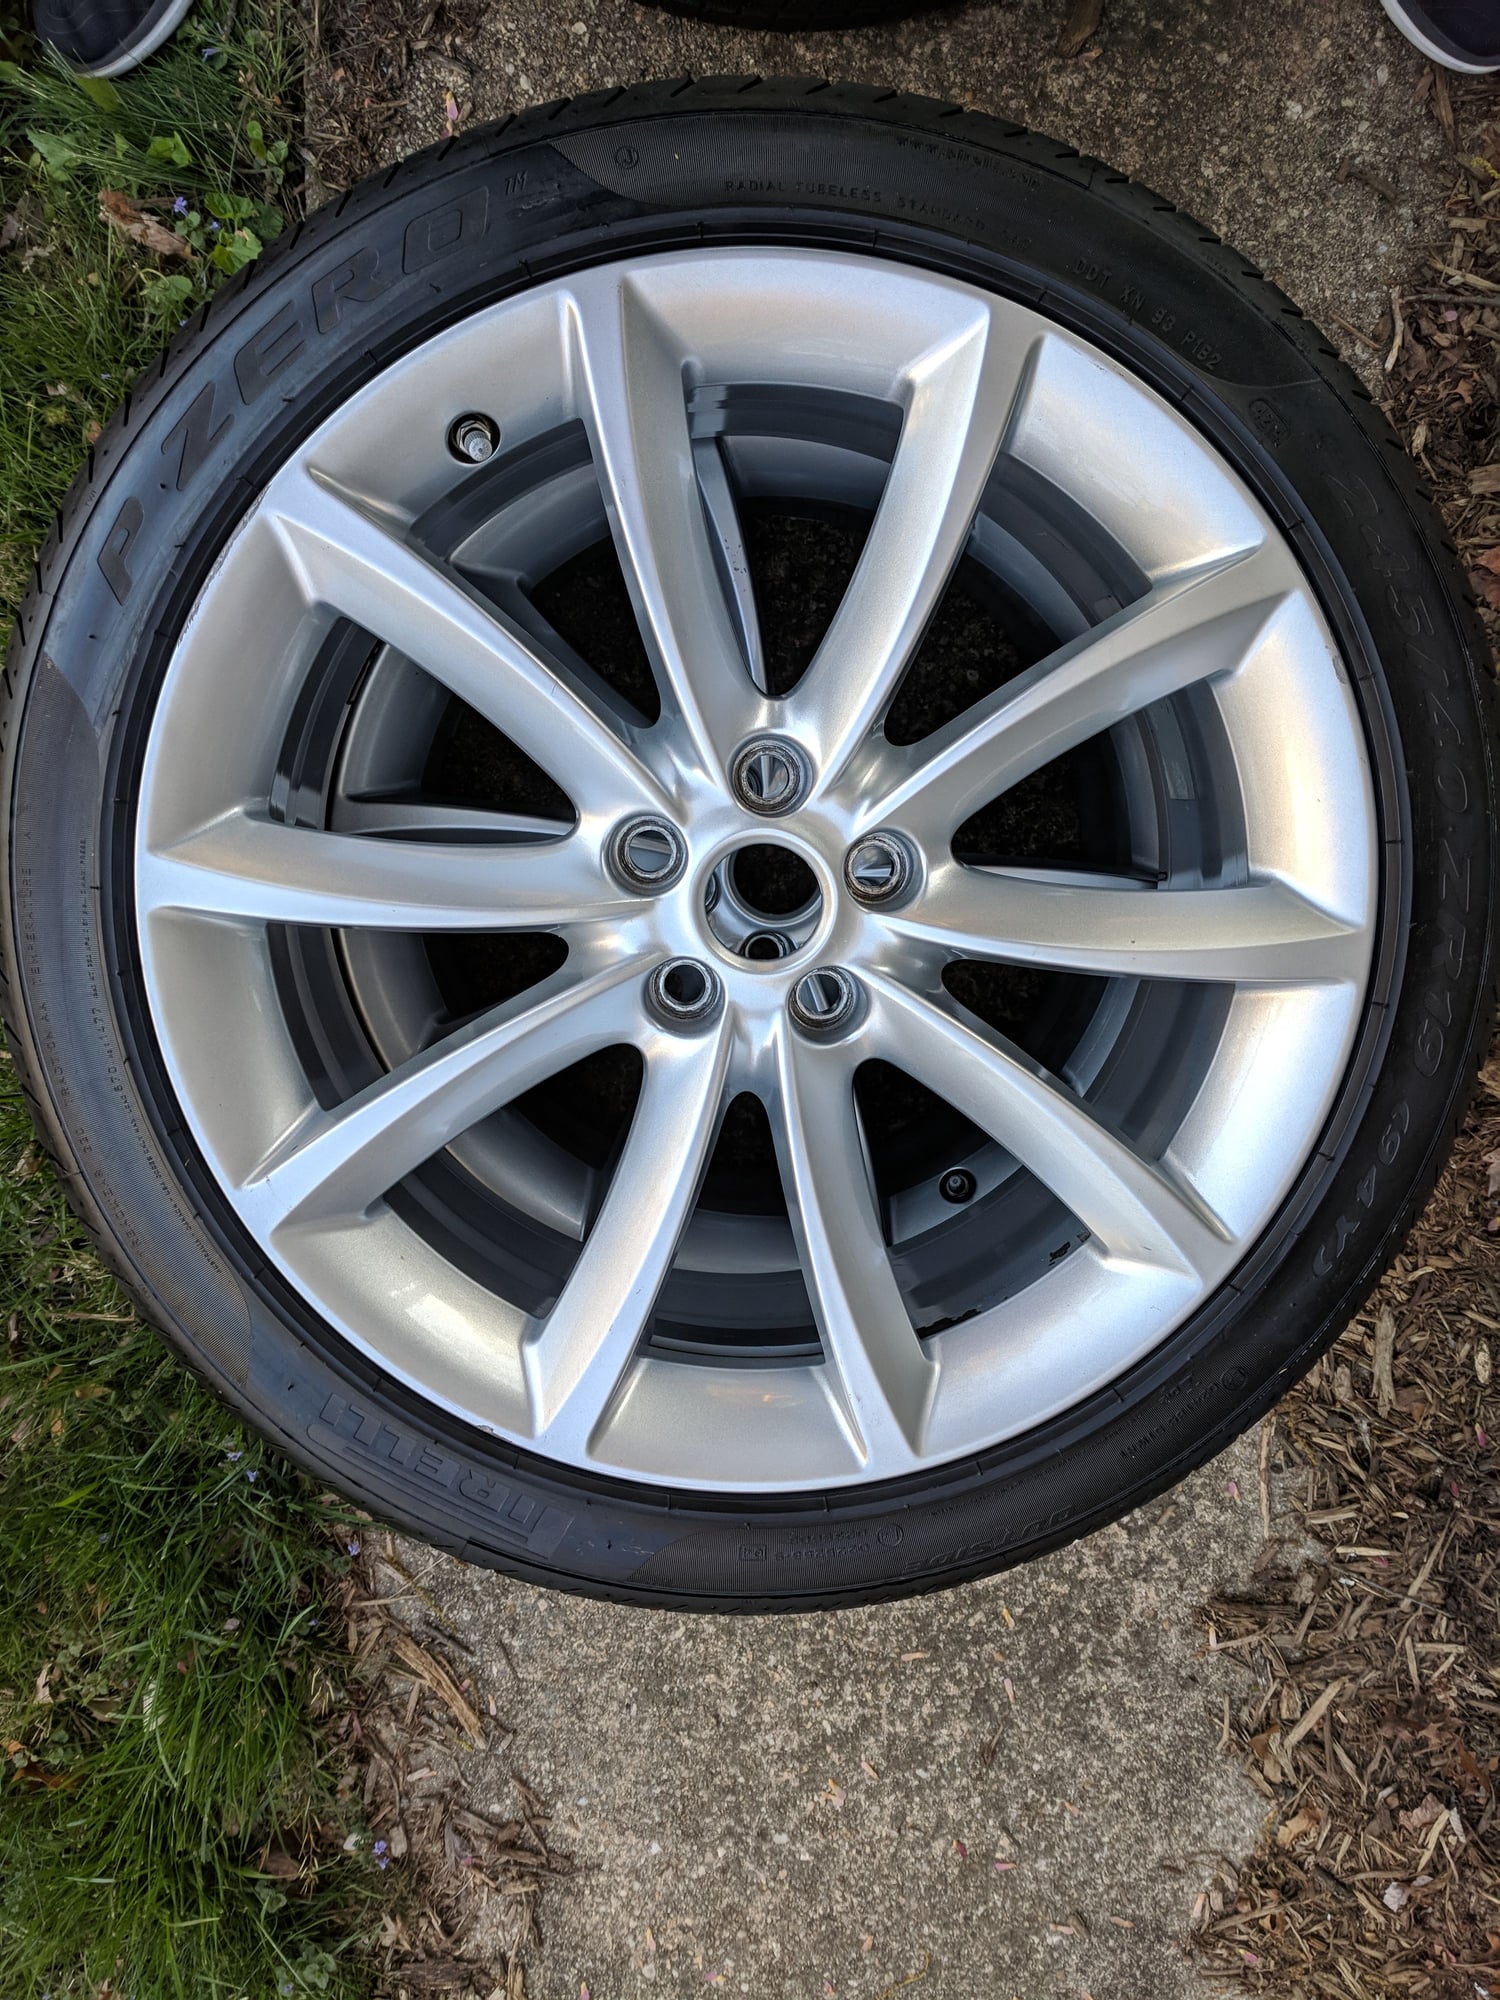 Wheels and Tires/Axles - Jaguar F-Type Propellor (Aquilla) 10 Spoke Wheelset with Pirelli P-Zero Tires - Used - 2013 to 2023 Jaguar F-Type - Chevy Chase, MD 20815, United States